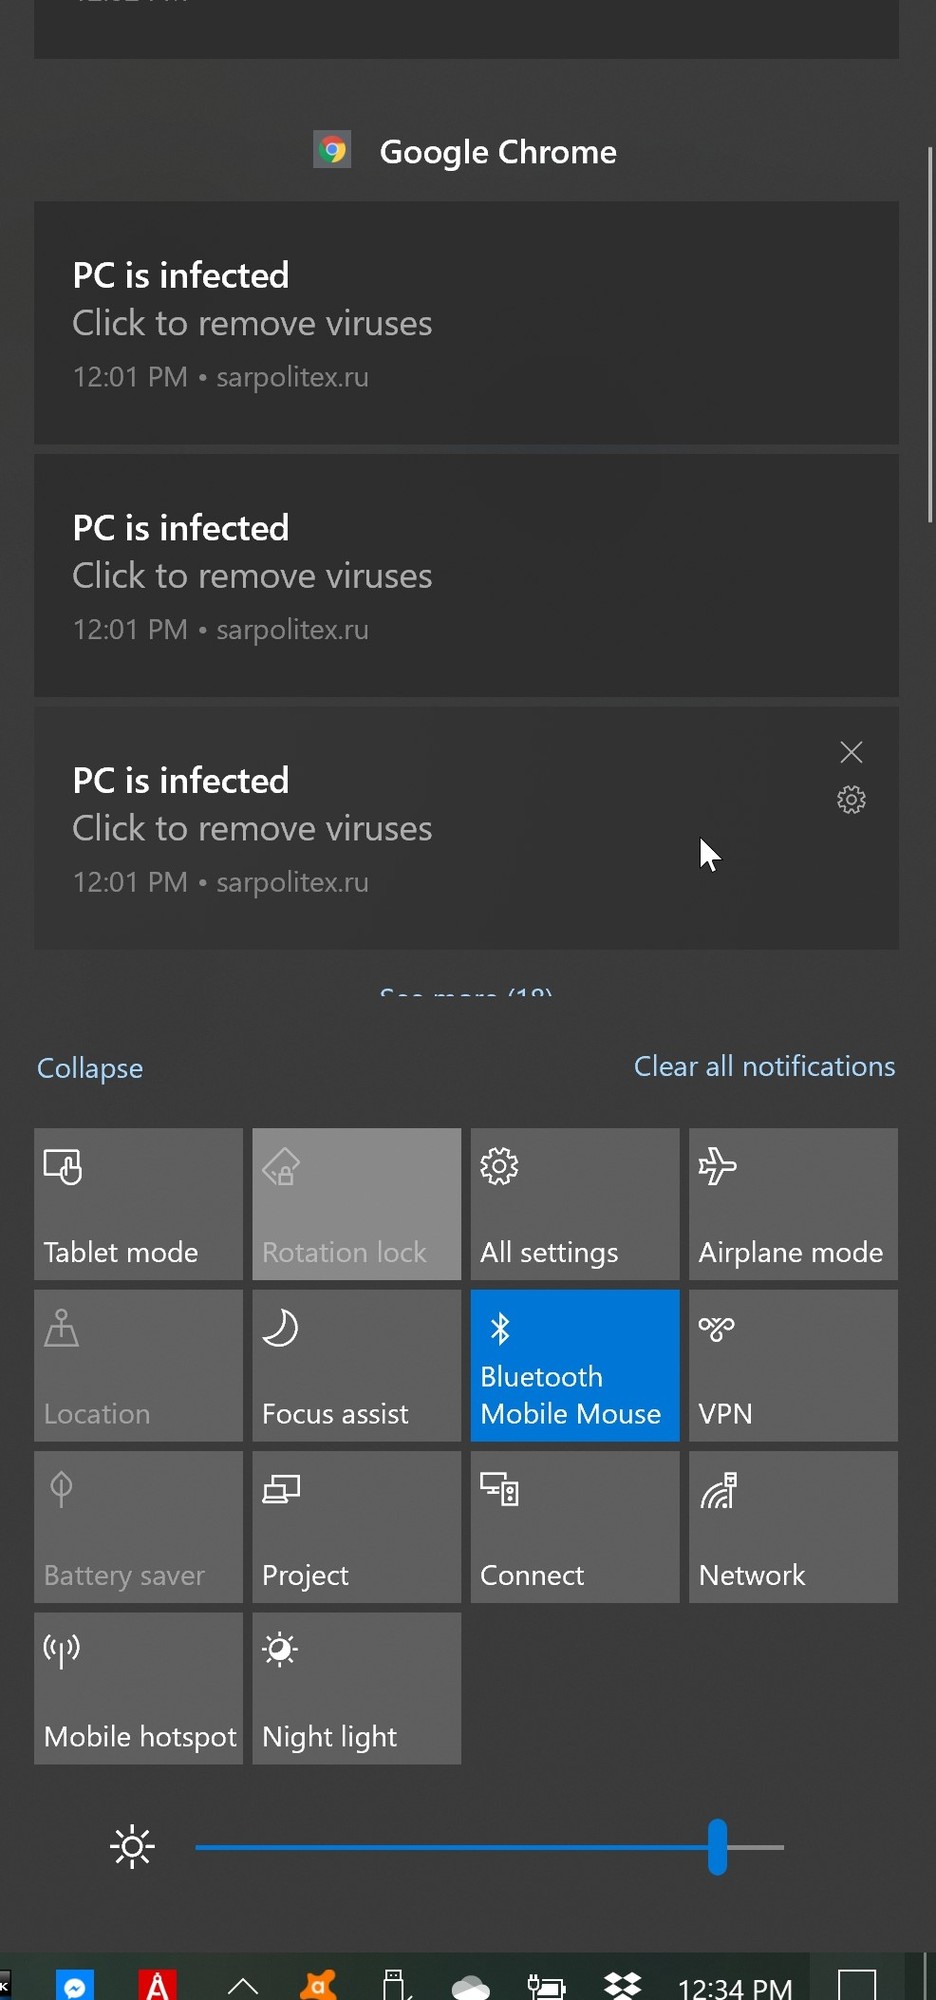 Windows 10 notifications: PC is infected; Click to remove viruses 6d488560-f630-46ed-ace5-c63ffebbe318?upload=true.jpg